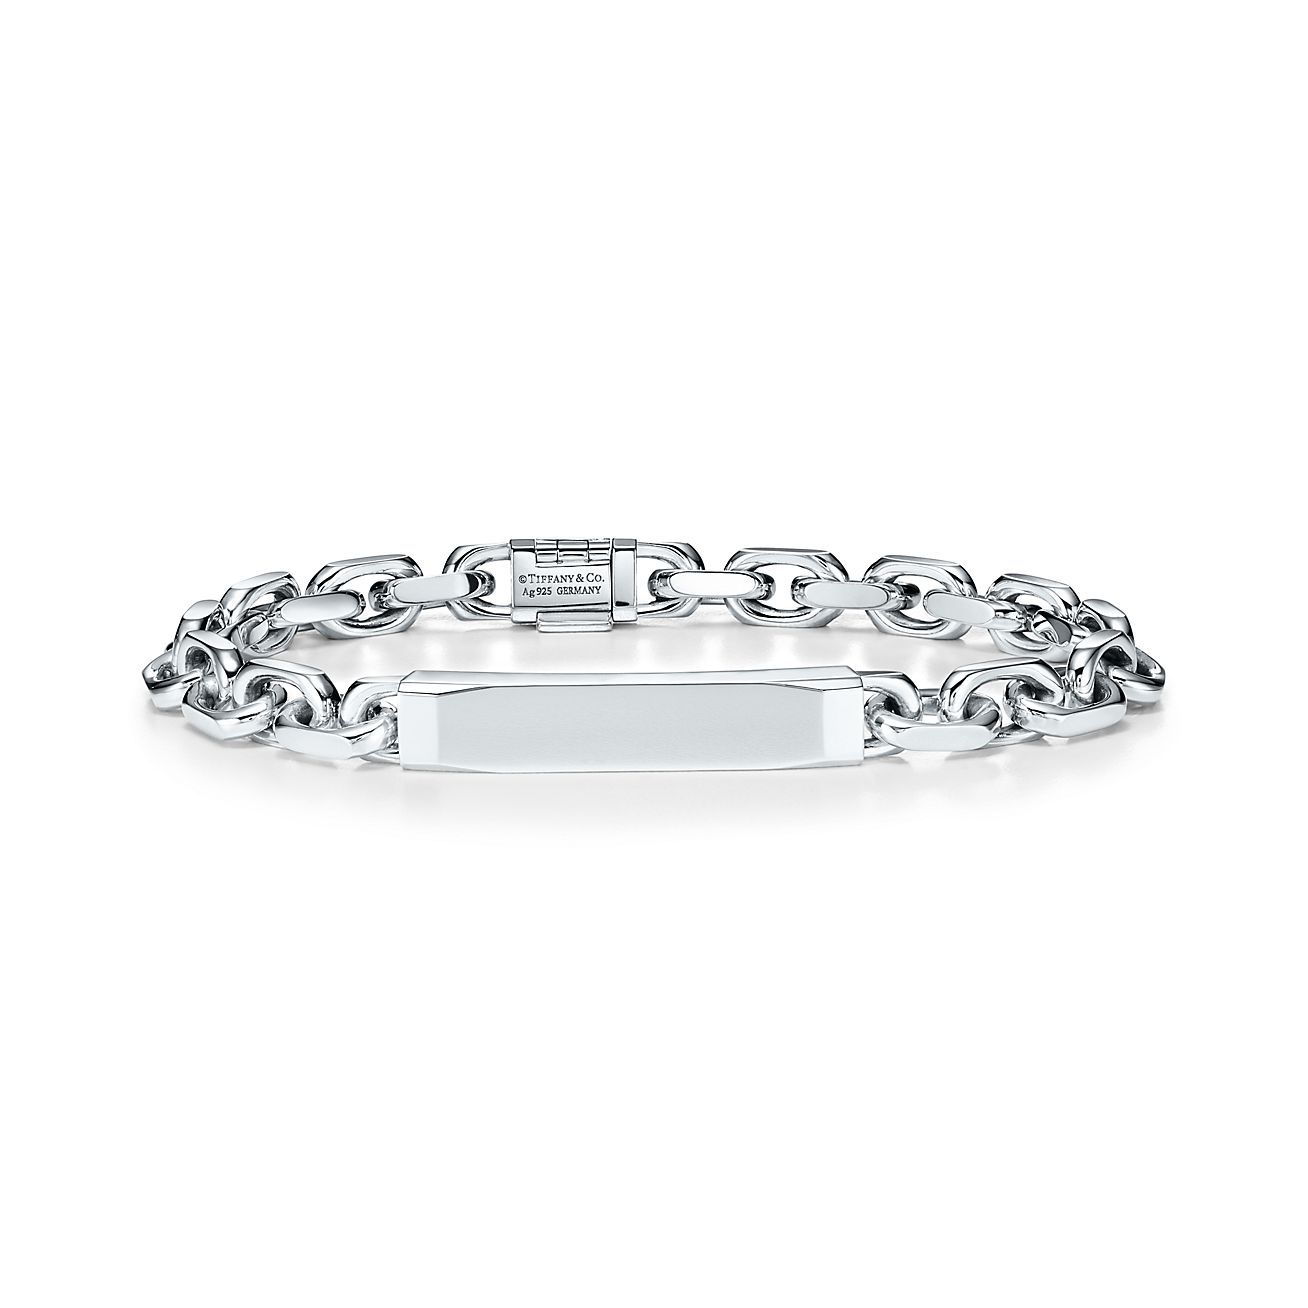 Tiffany 1837® Makers I.D. Chain Bracelet in Sterling Silver